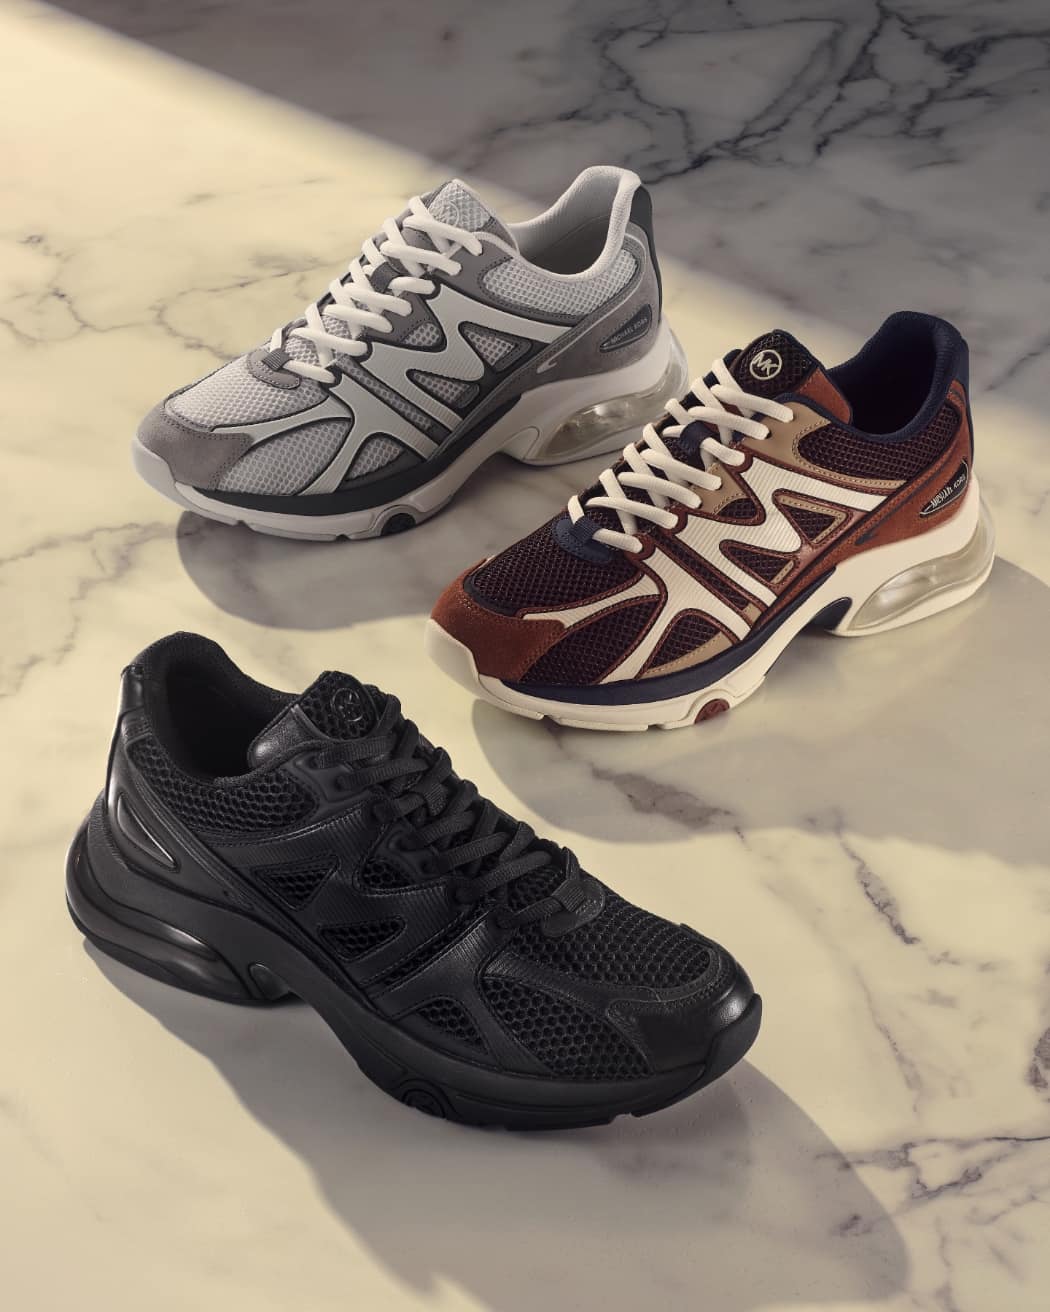 New Balance Sues Michael Kors over its famous N Trademark  NBS  Intellectual Sdn Bhd